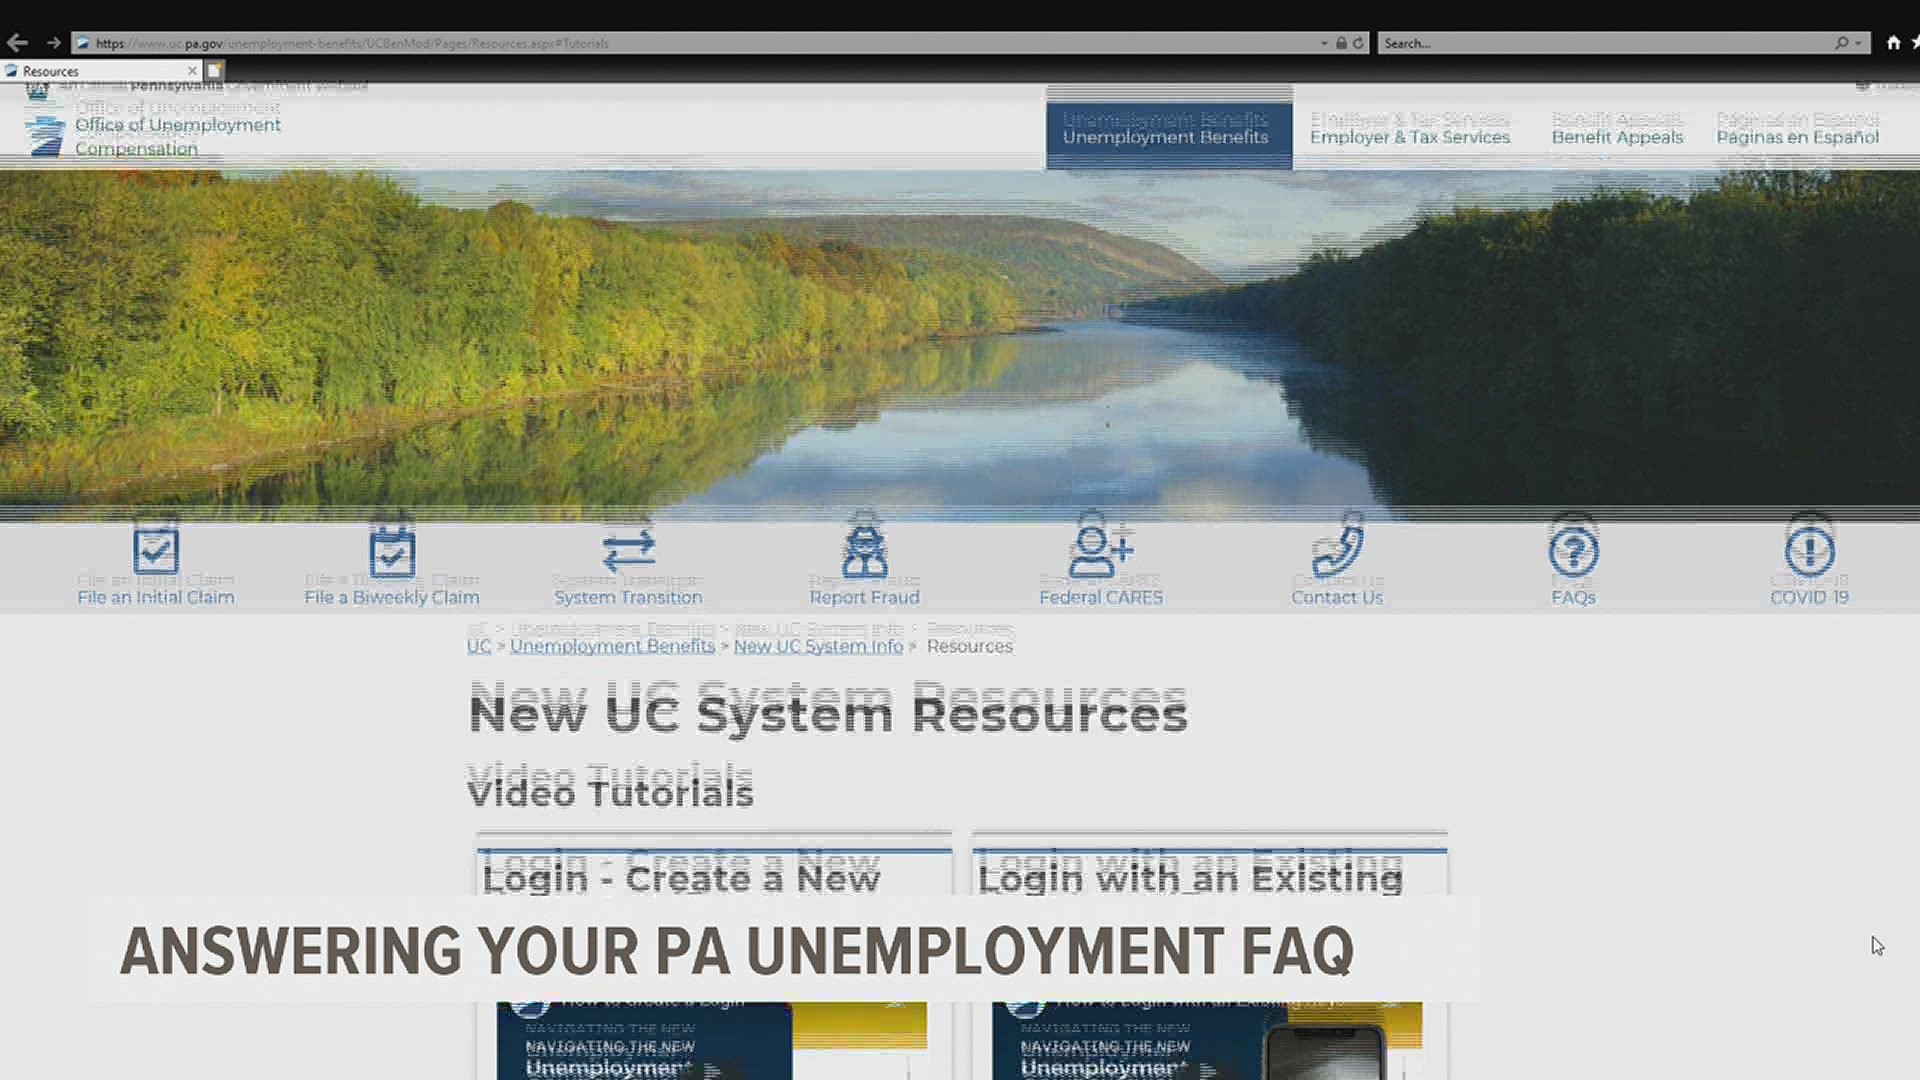 Pennsylvania's new unemployment system is set to launch of June 8th.